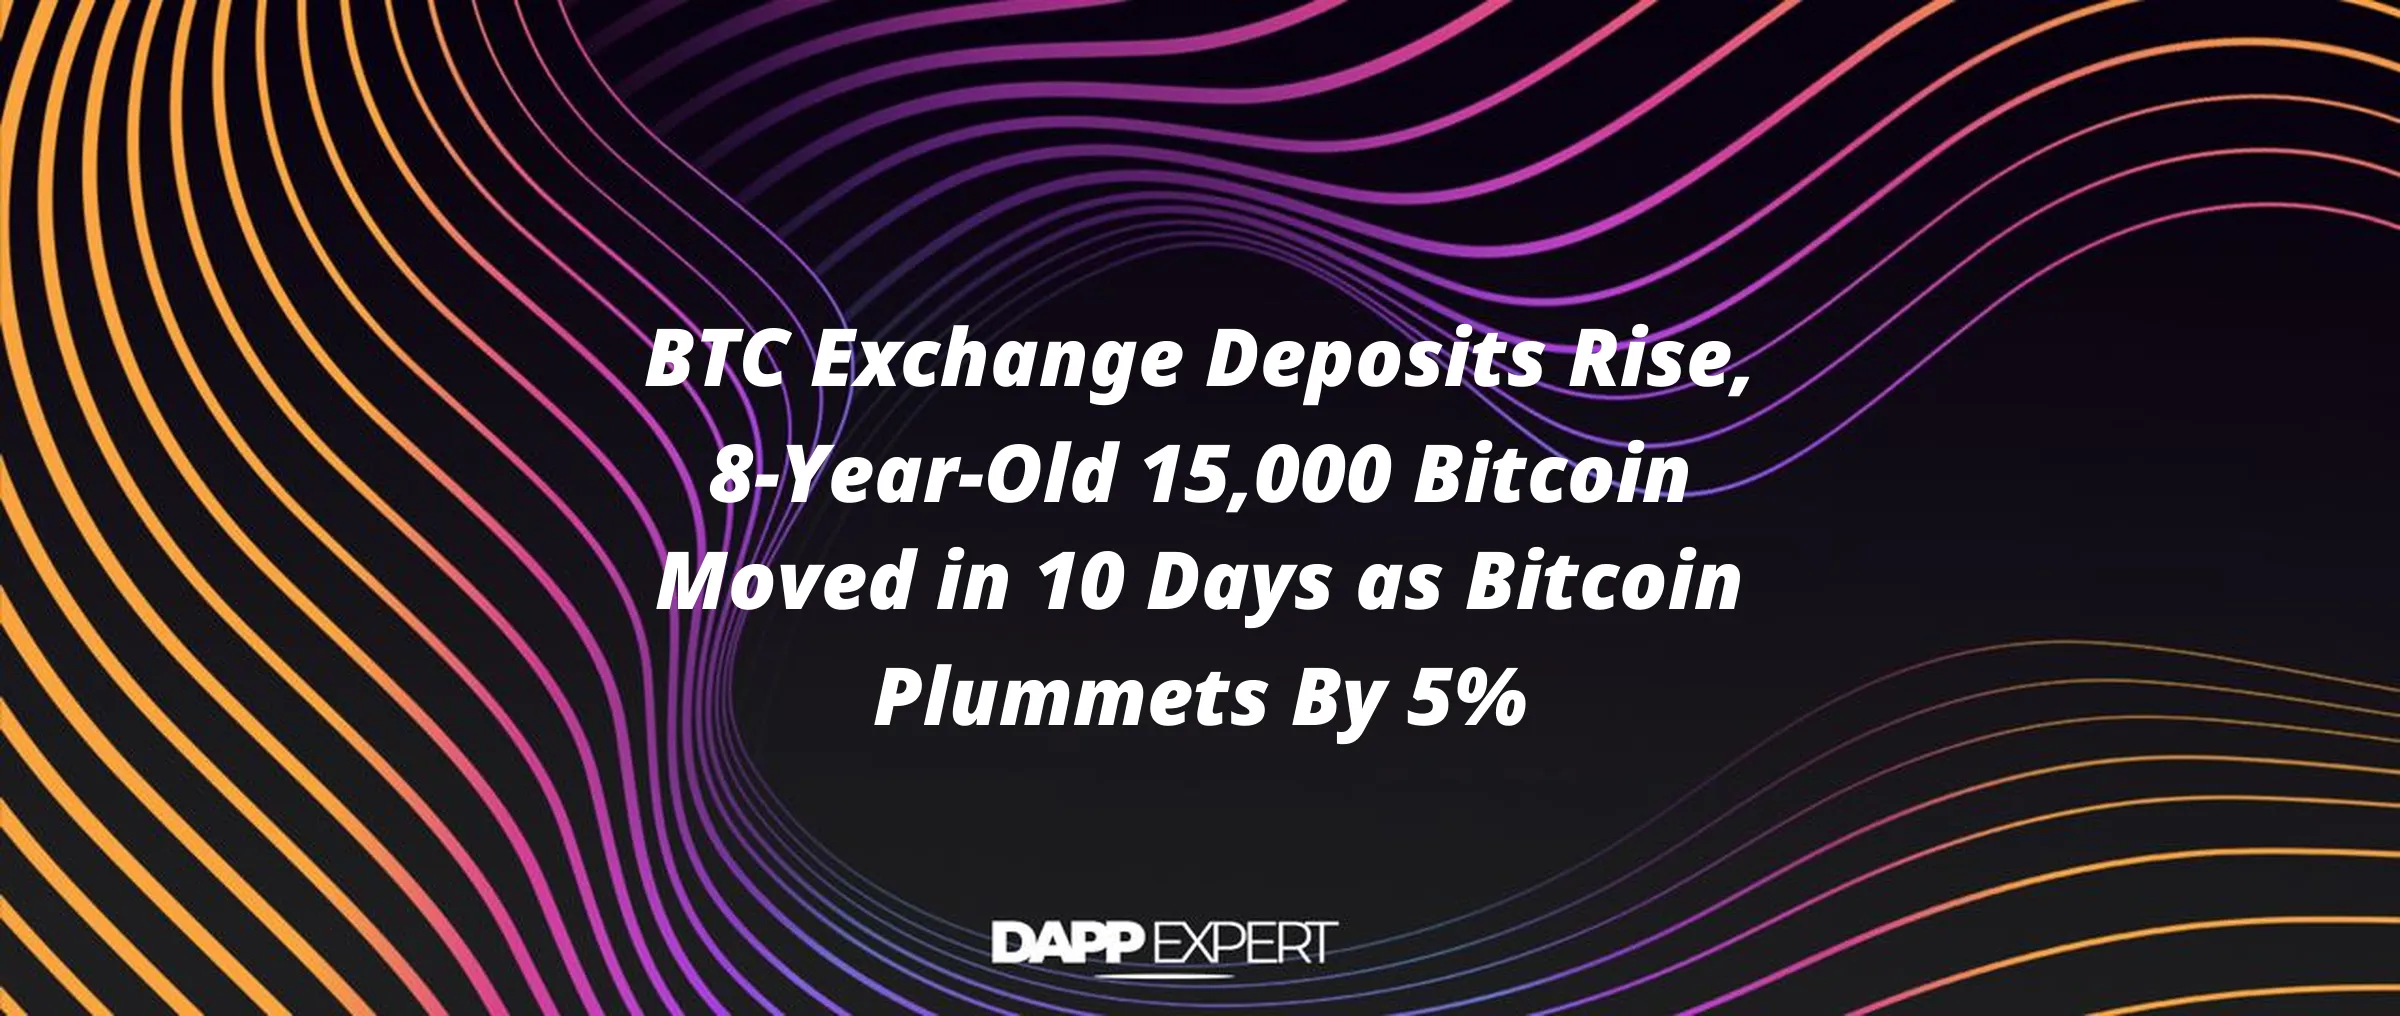 BTC Exchange Deposits Rise, 8-Year-Old 15,000 Bitcoin Moved in 10 Days as Bitcoin Plummets By 5%